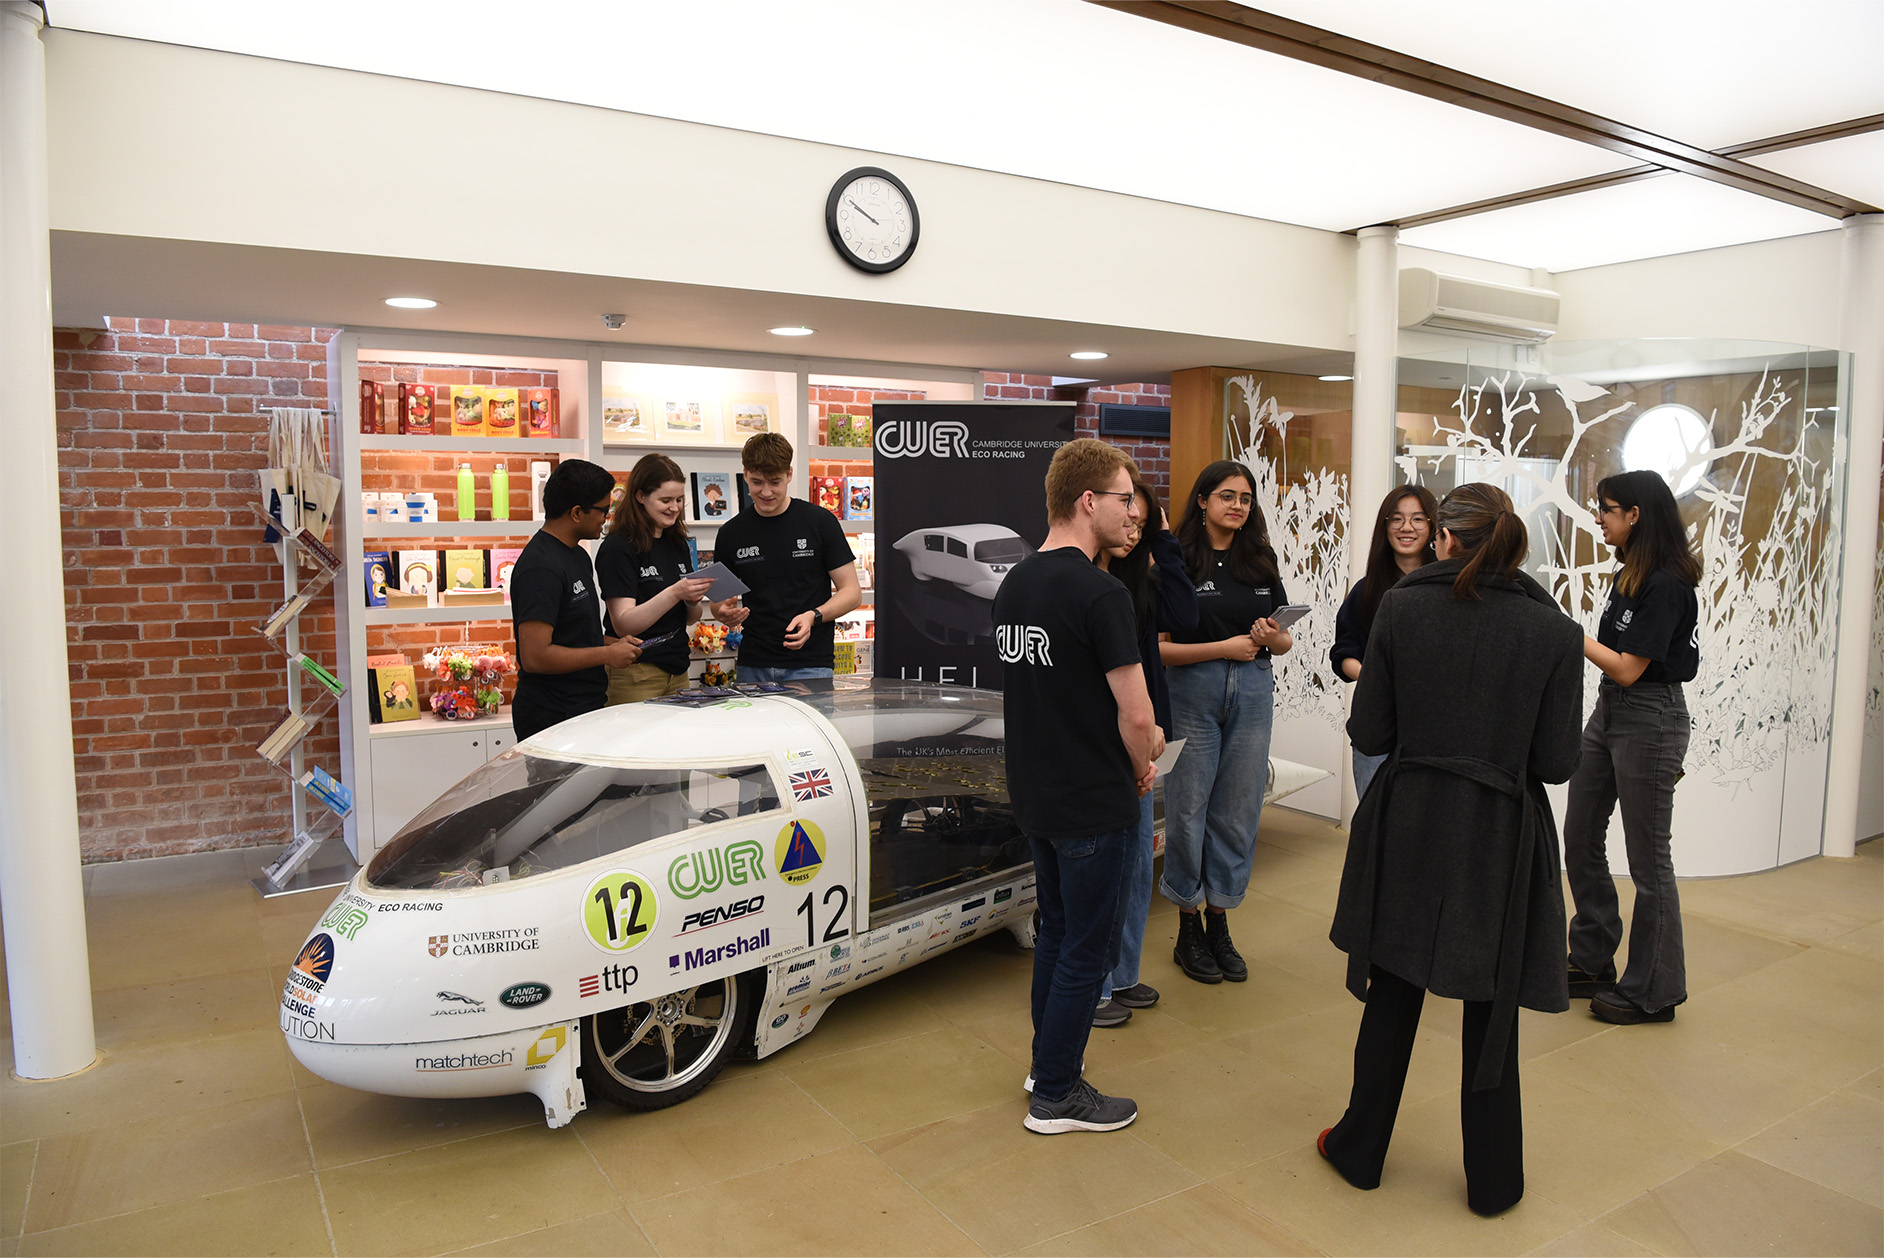 Photo showing Cambridge University Eco Racing's Helia car and support team